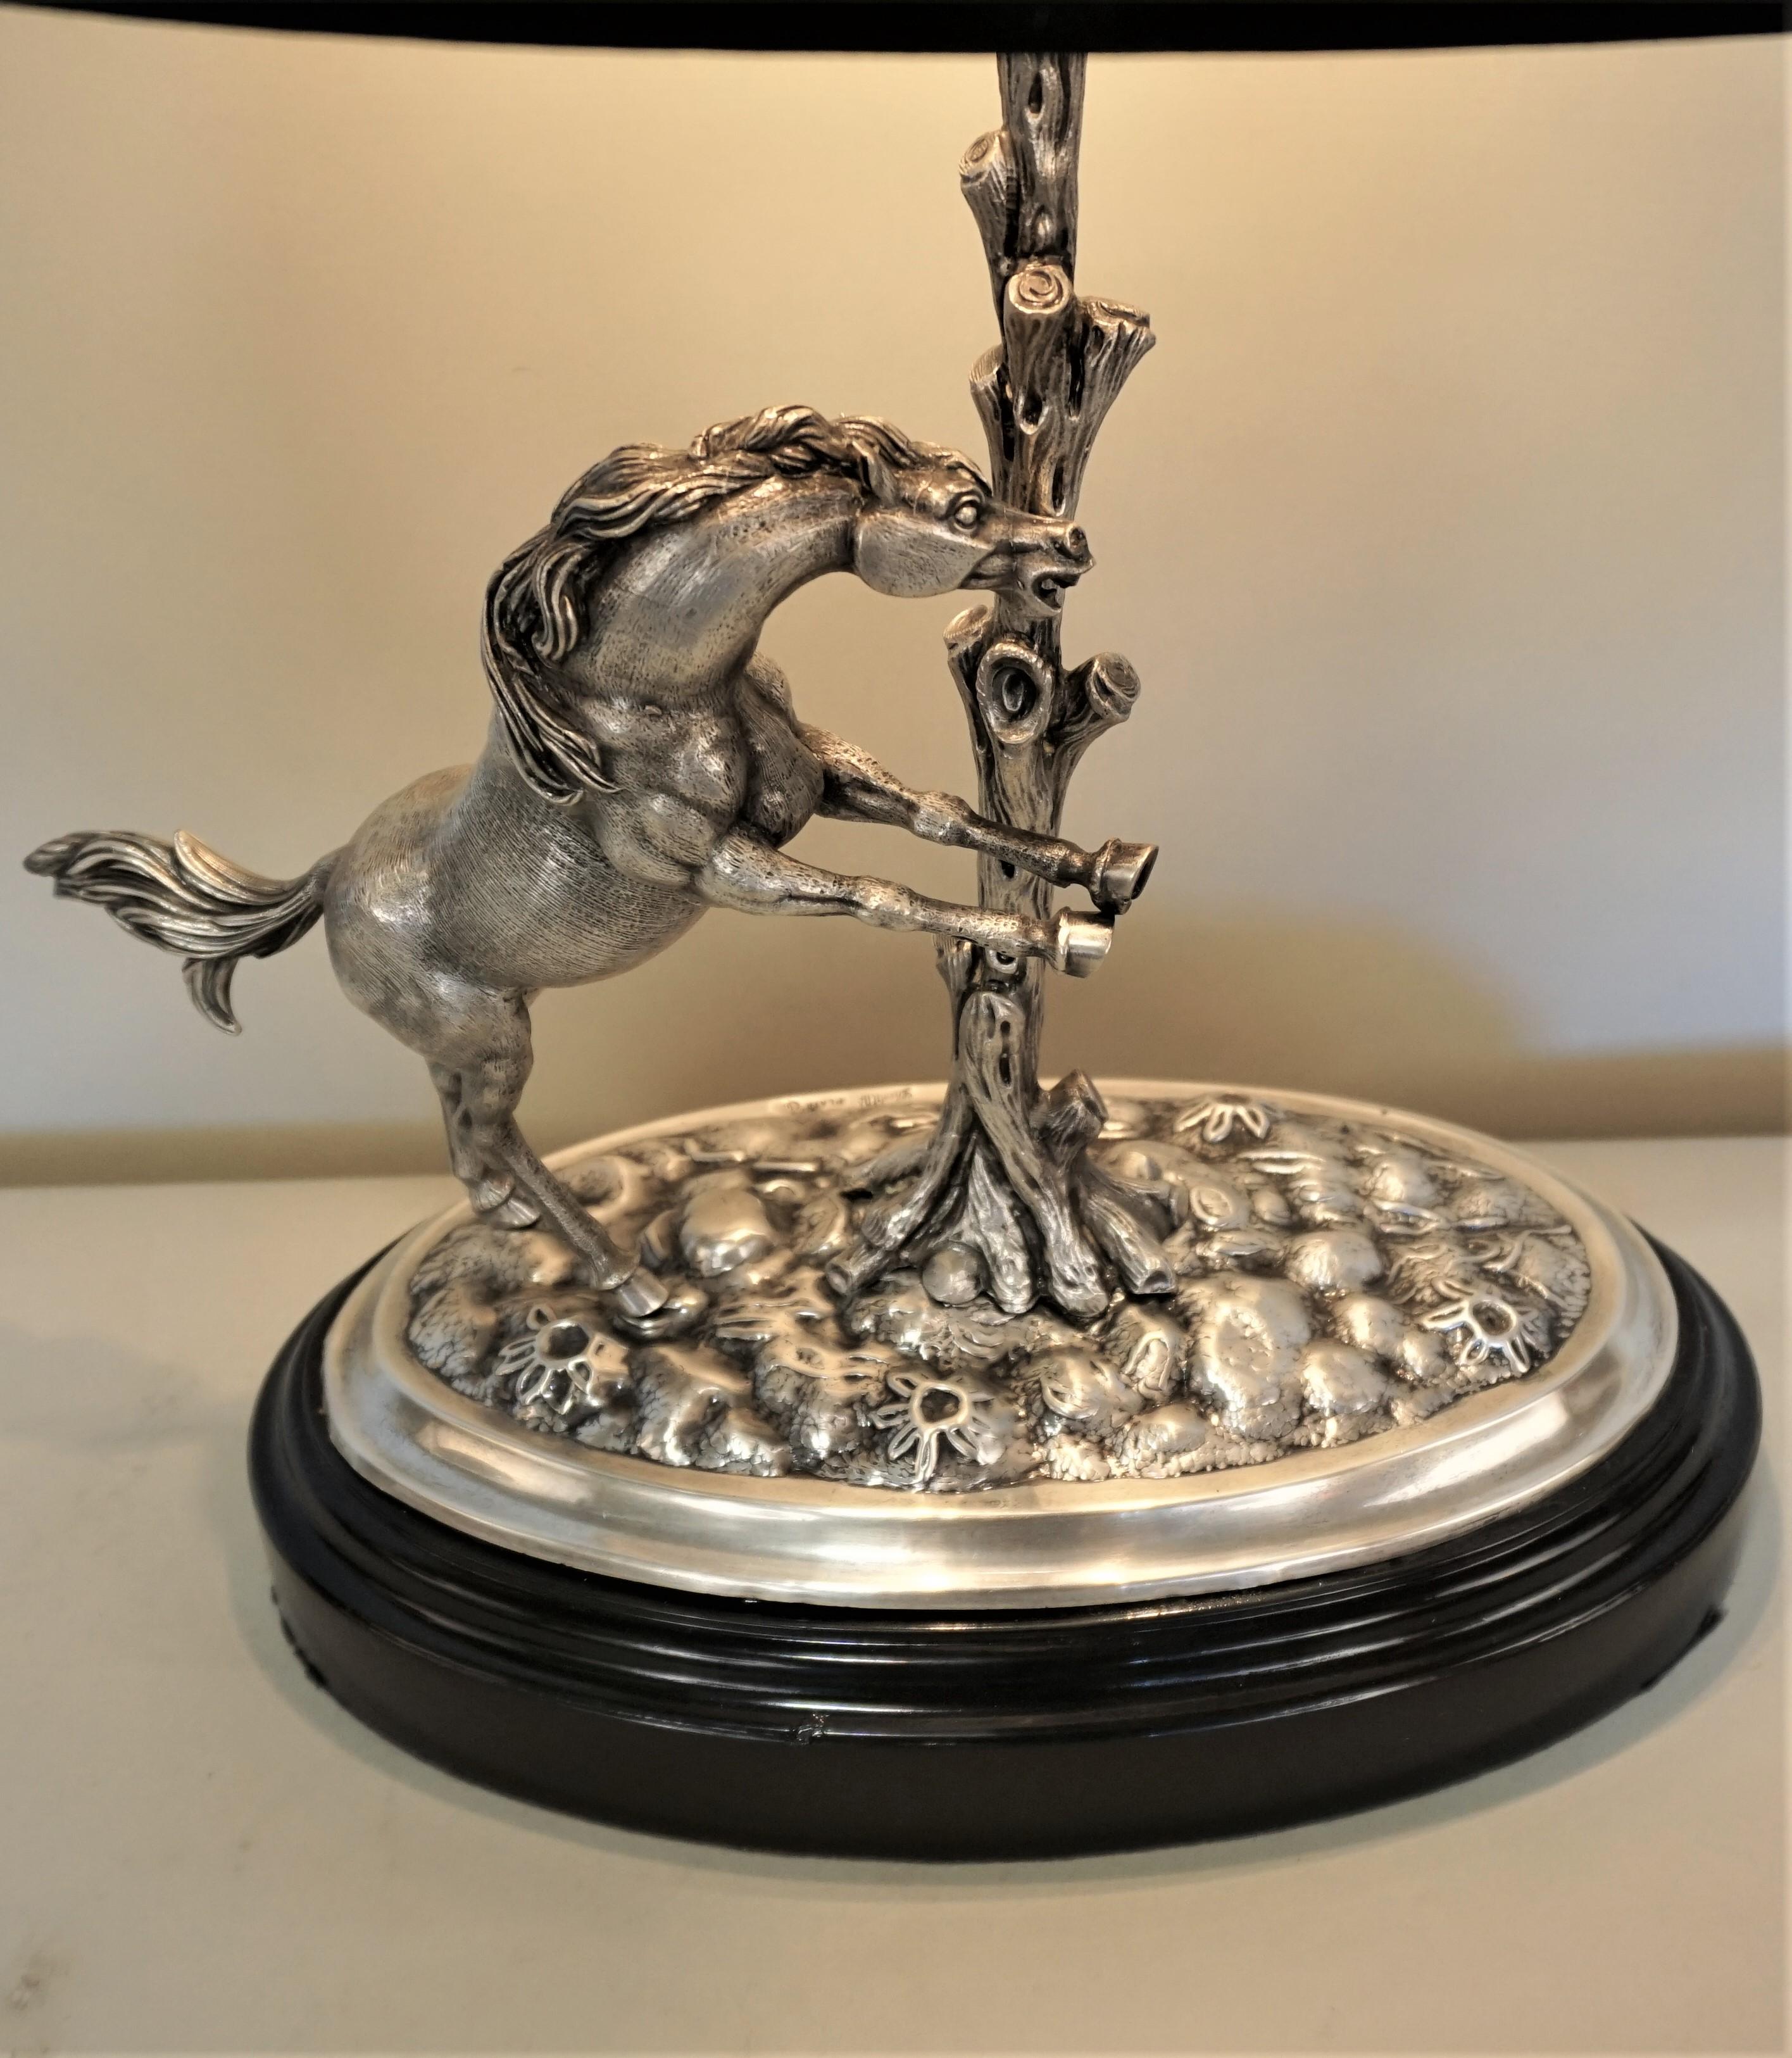 Sterling silver sculpture of a horse that has been modified as a table lamp
(Silver Gena Manufacturas De Orfebreria, S.A. Calle Provenza, 260 Barcelona).